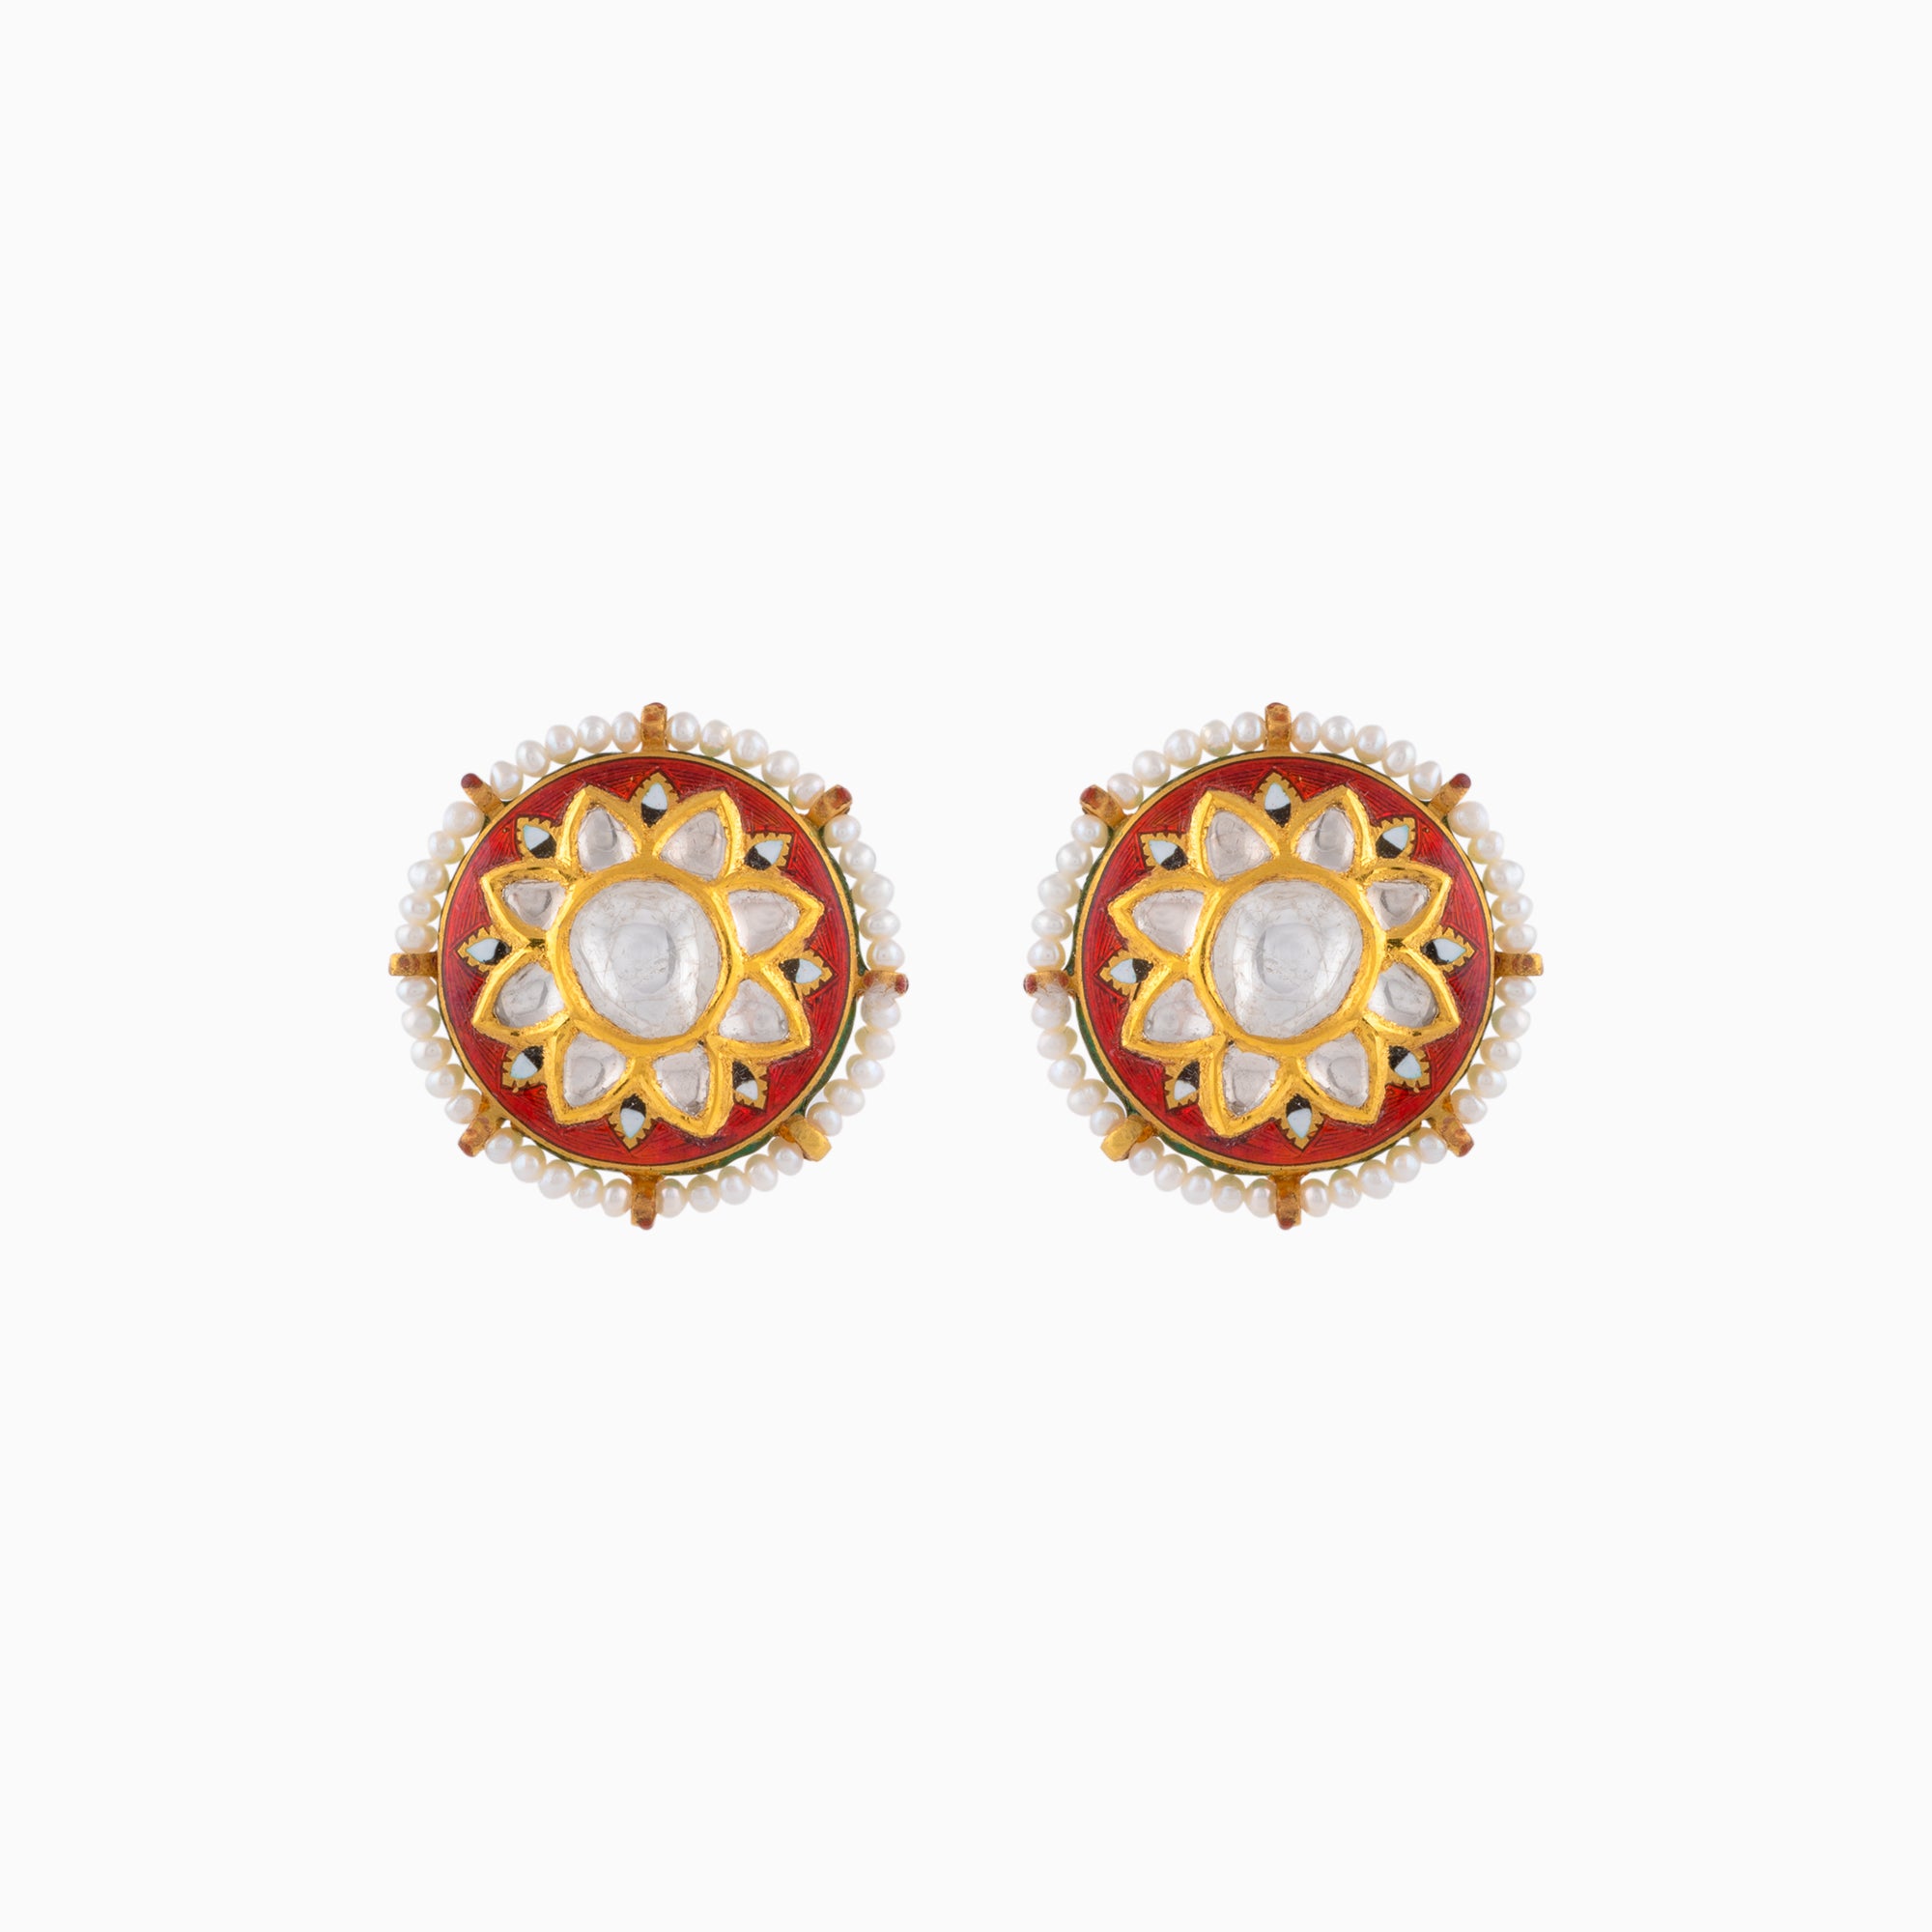 Earring Pair with Uncut Polki Diamond and Pearls-KME1881